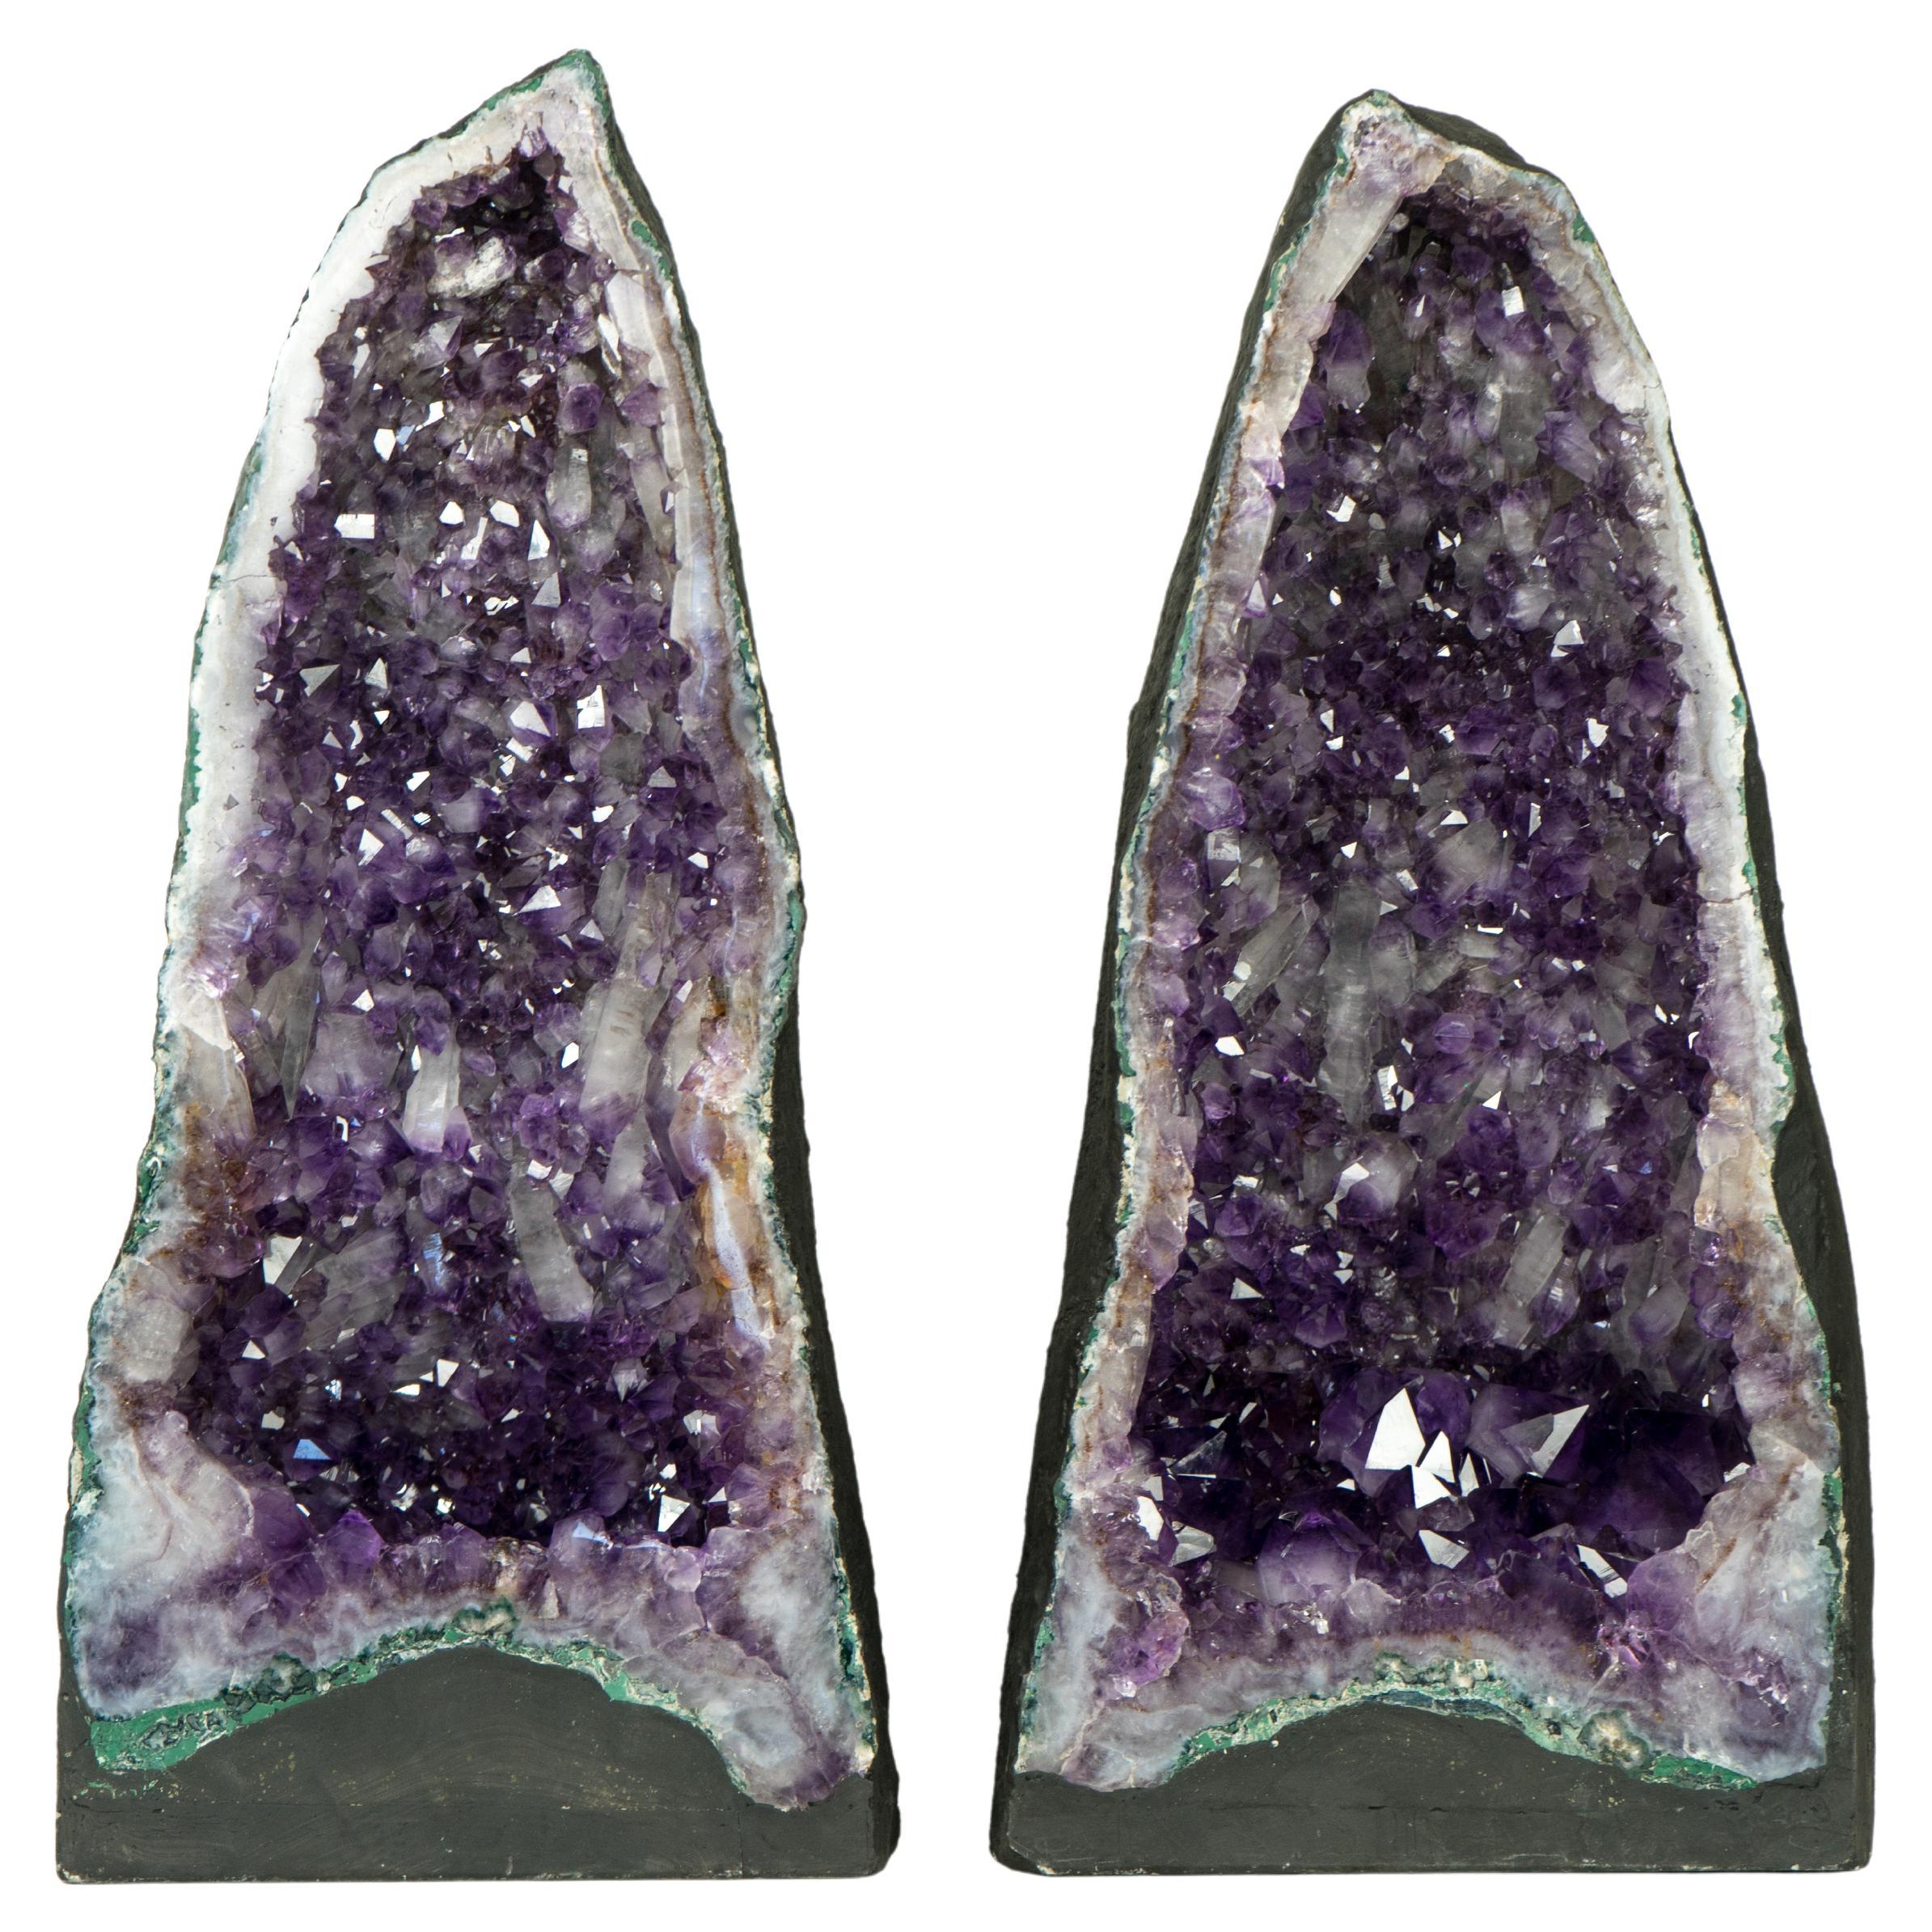 Pair of Tall Deep Purple Amethyst Crystal Geode Cathedrals, with Rare Druzy